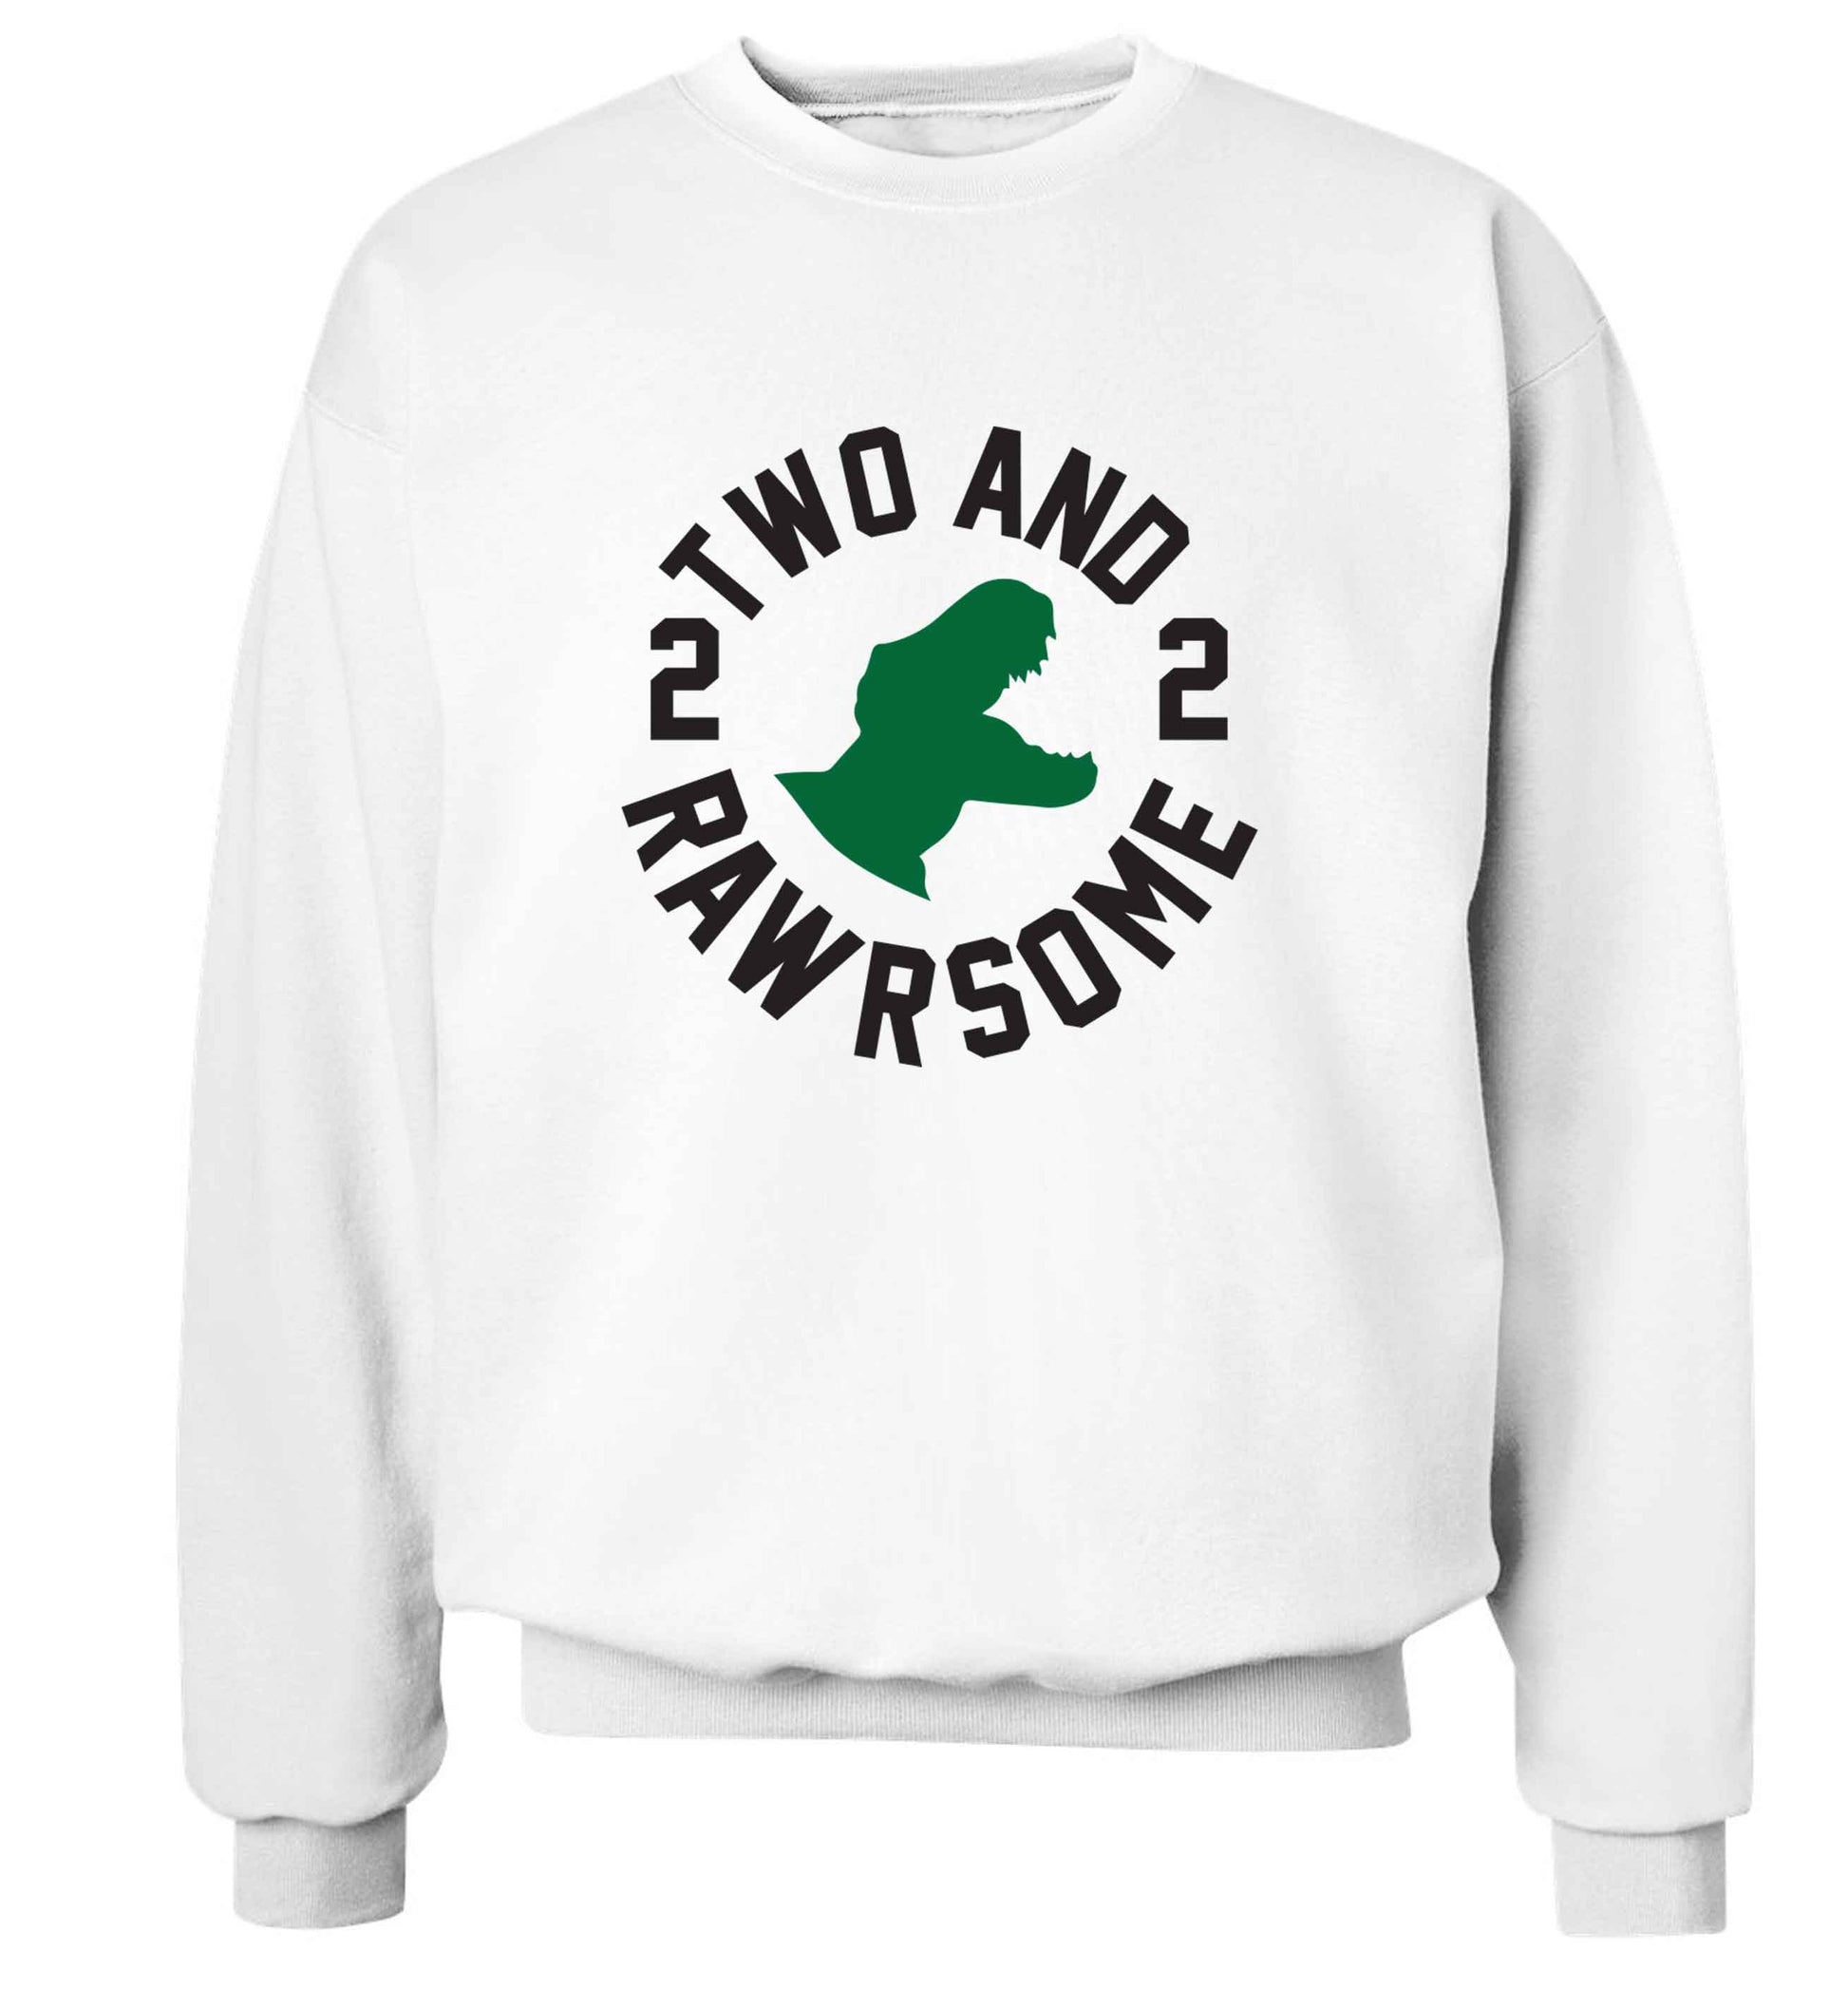 Two and rawrsome adult's unisex white sweater 2XL